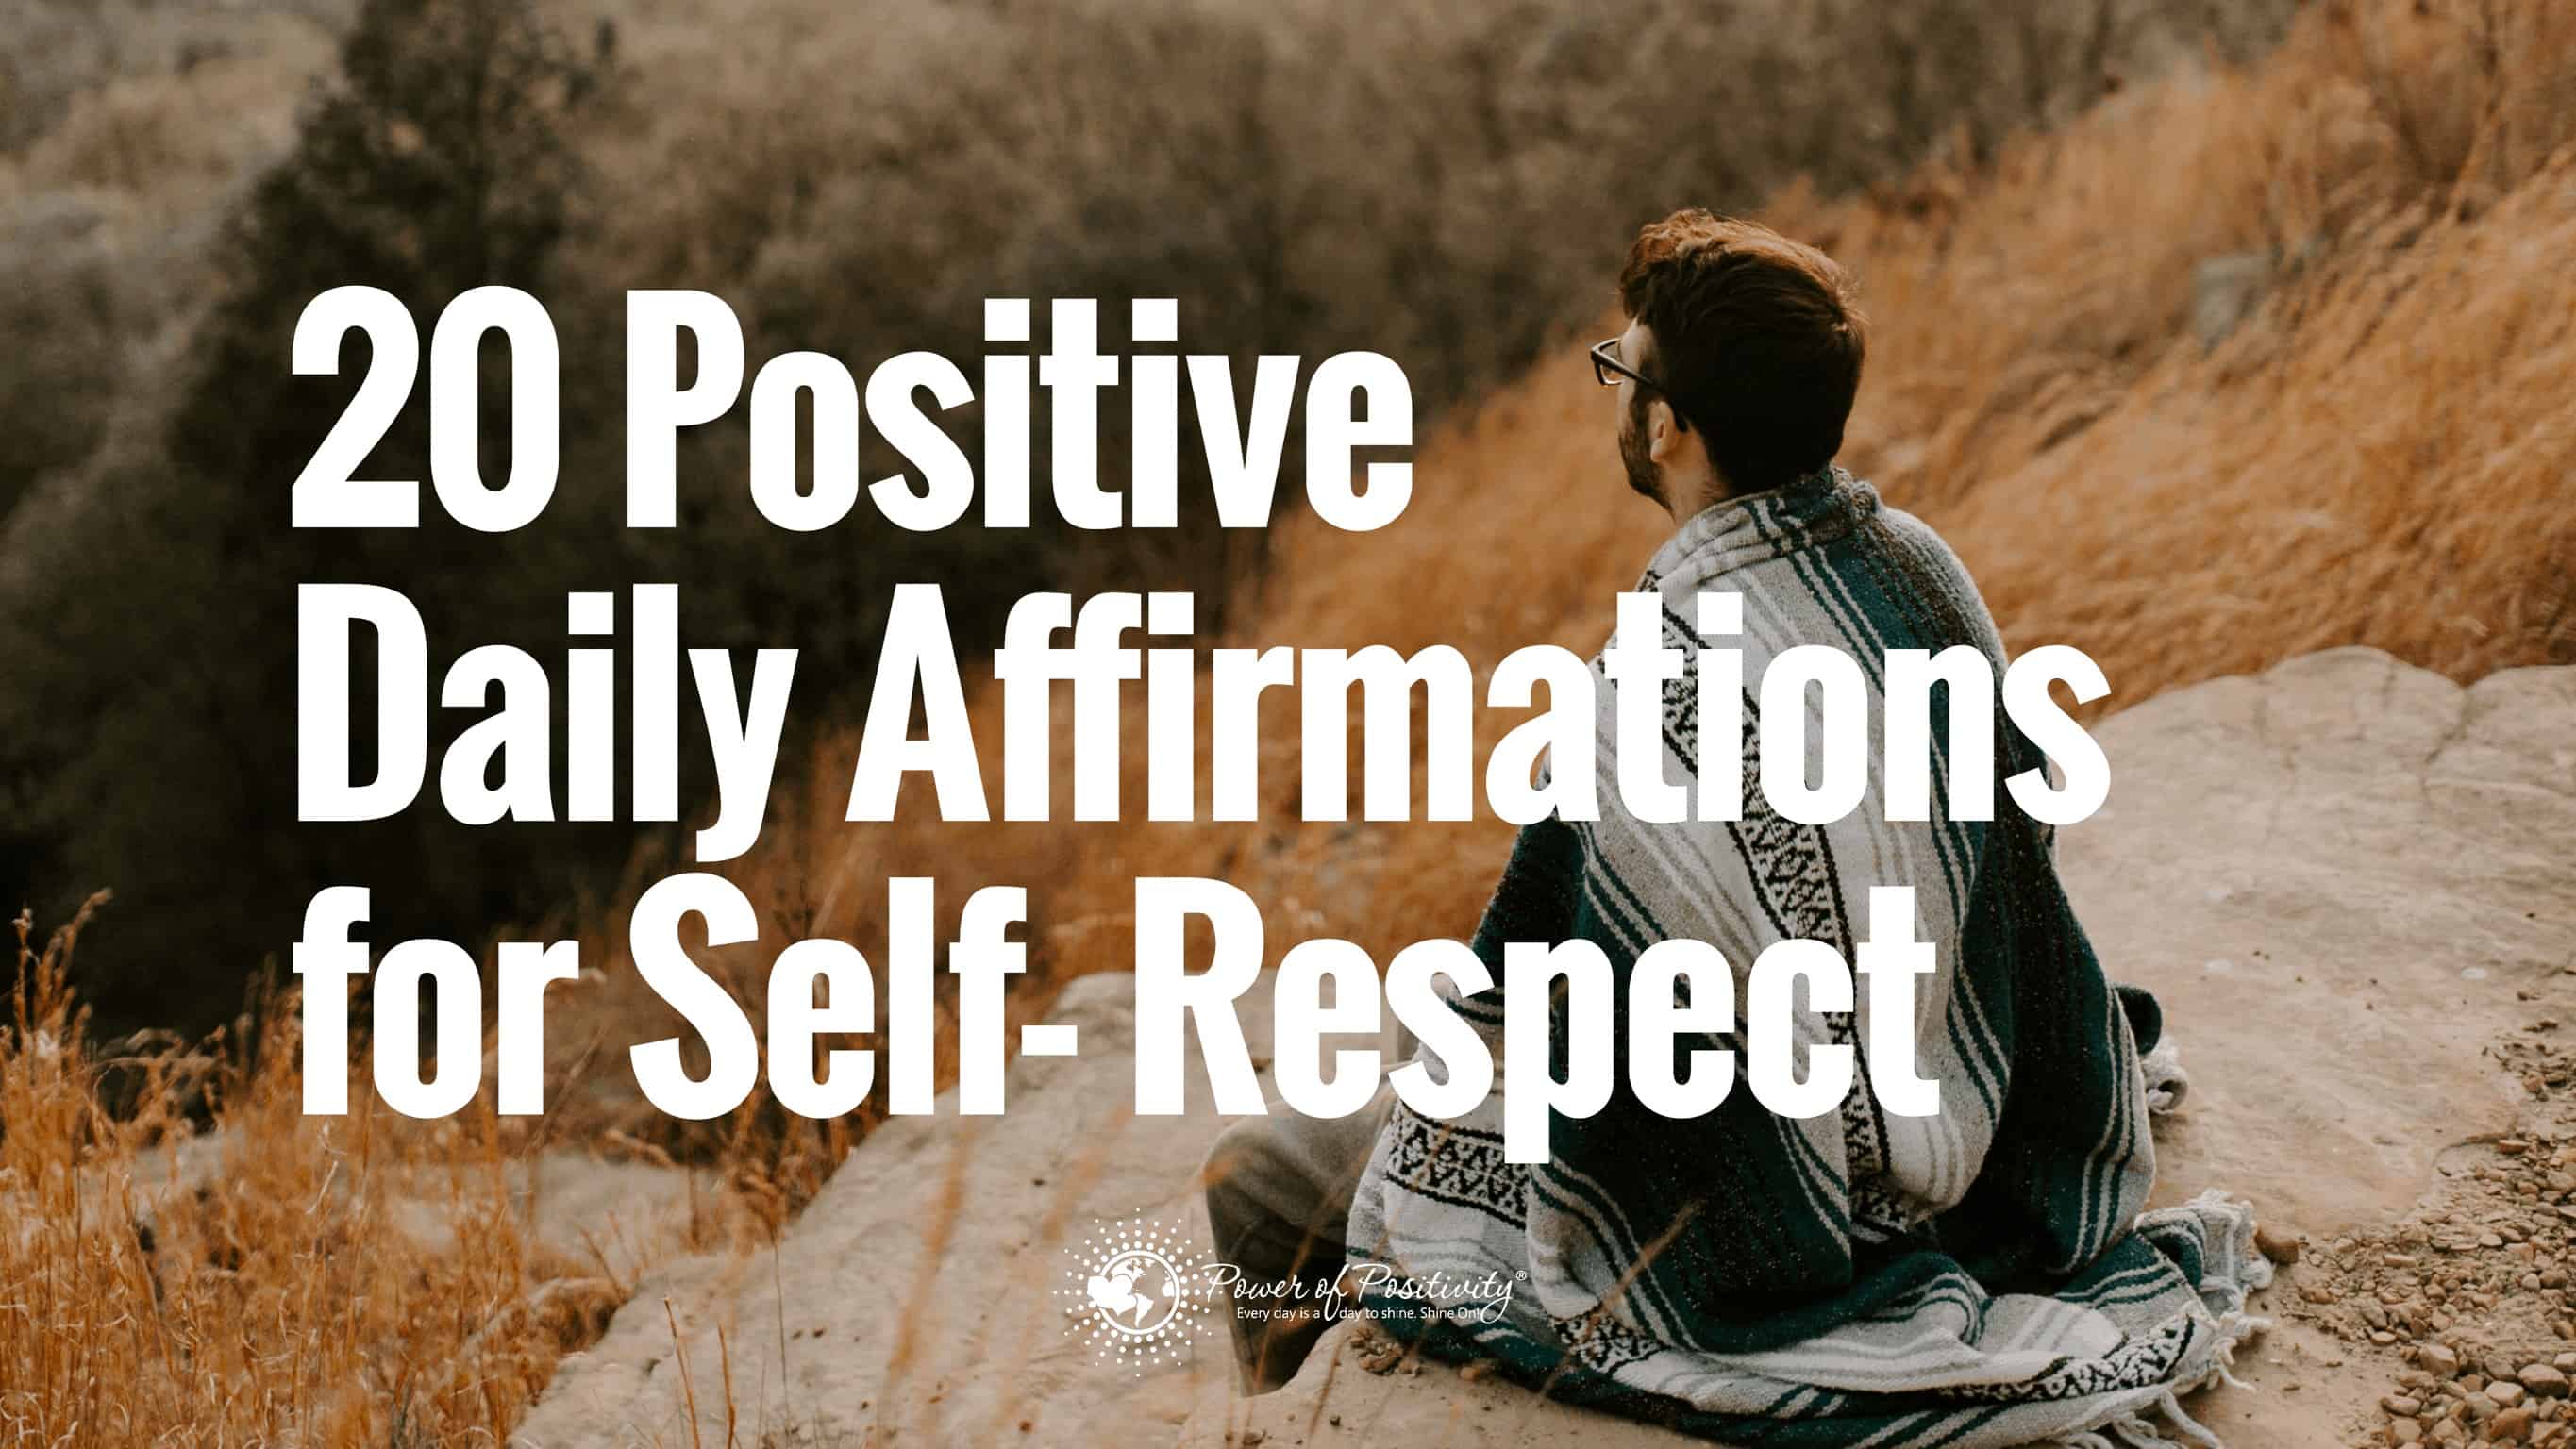 20 Positive Daily Affirmations for Self-Respect